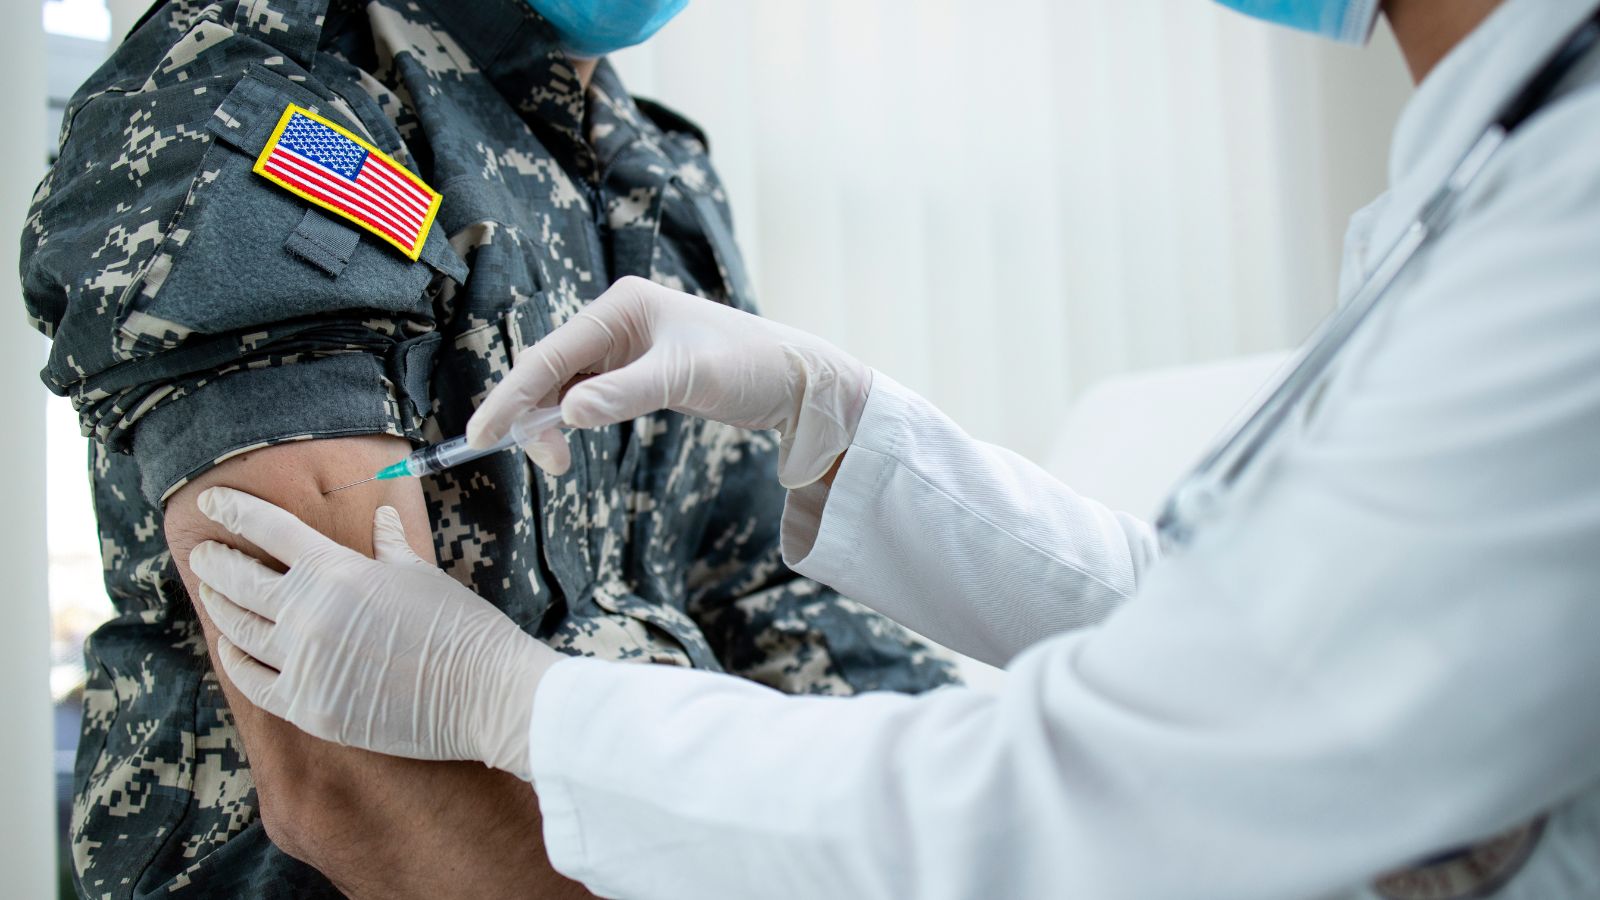 “Just Another Biden Blunder”: Army Makes U-Turn on Vaccine Mandate